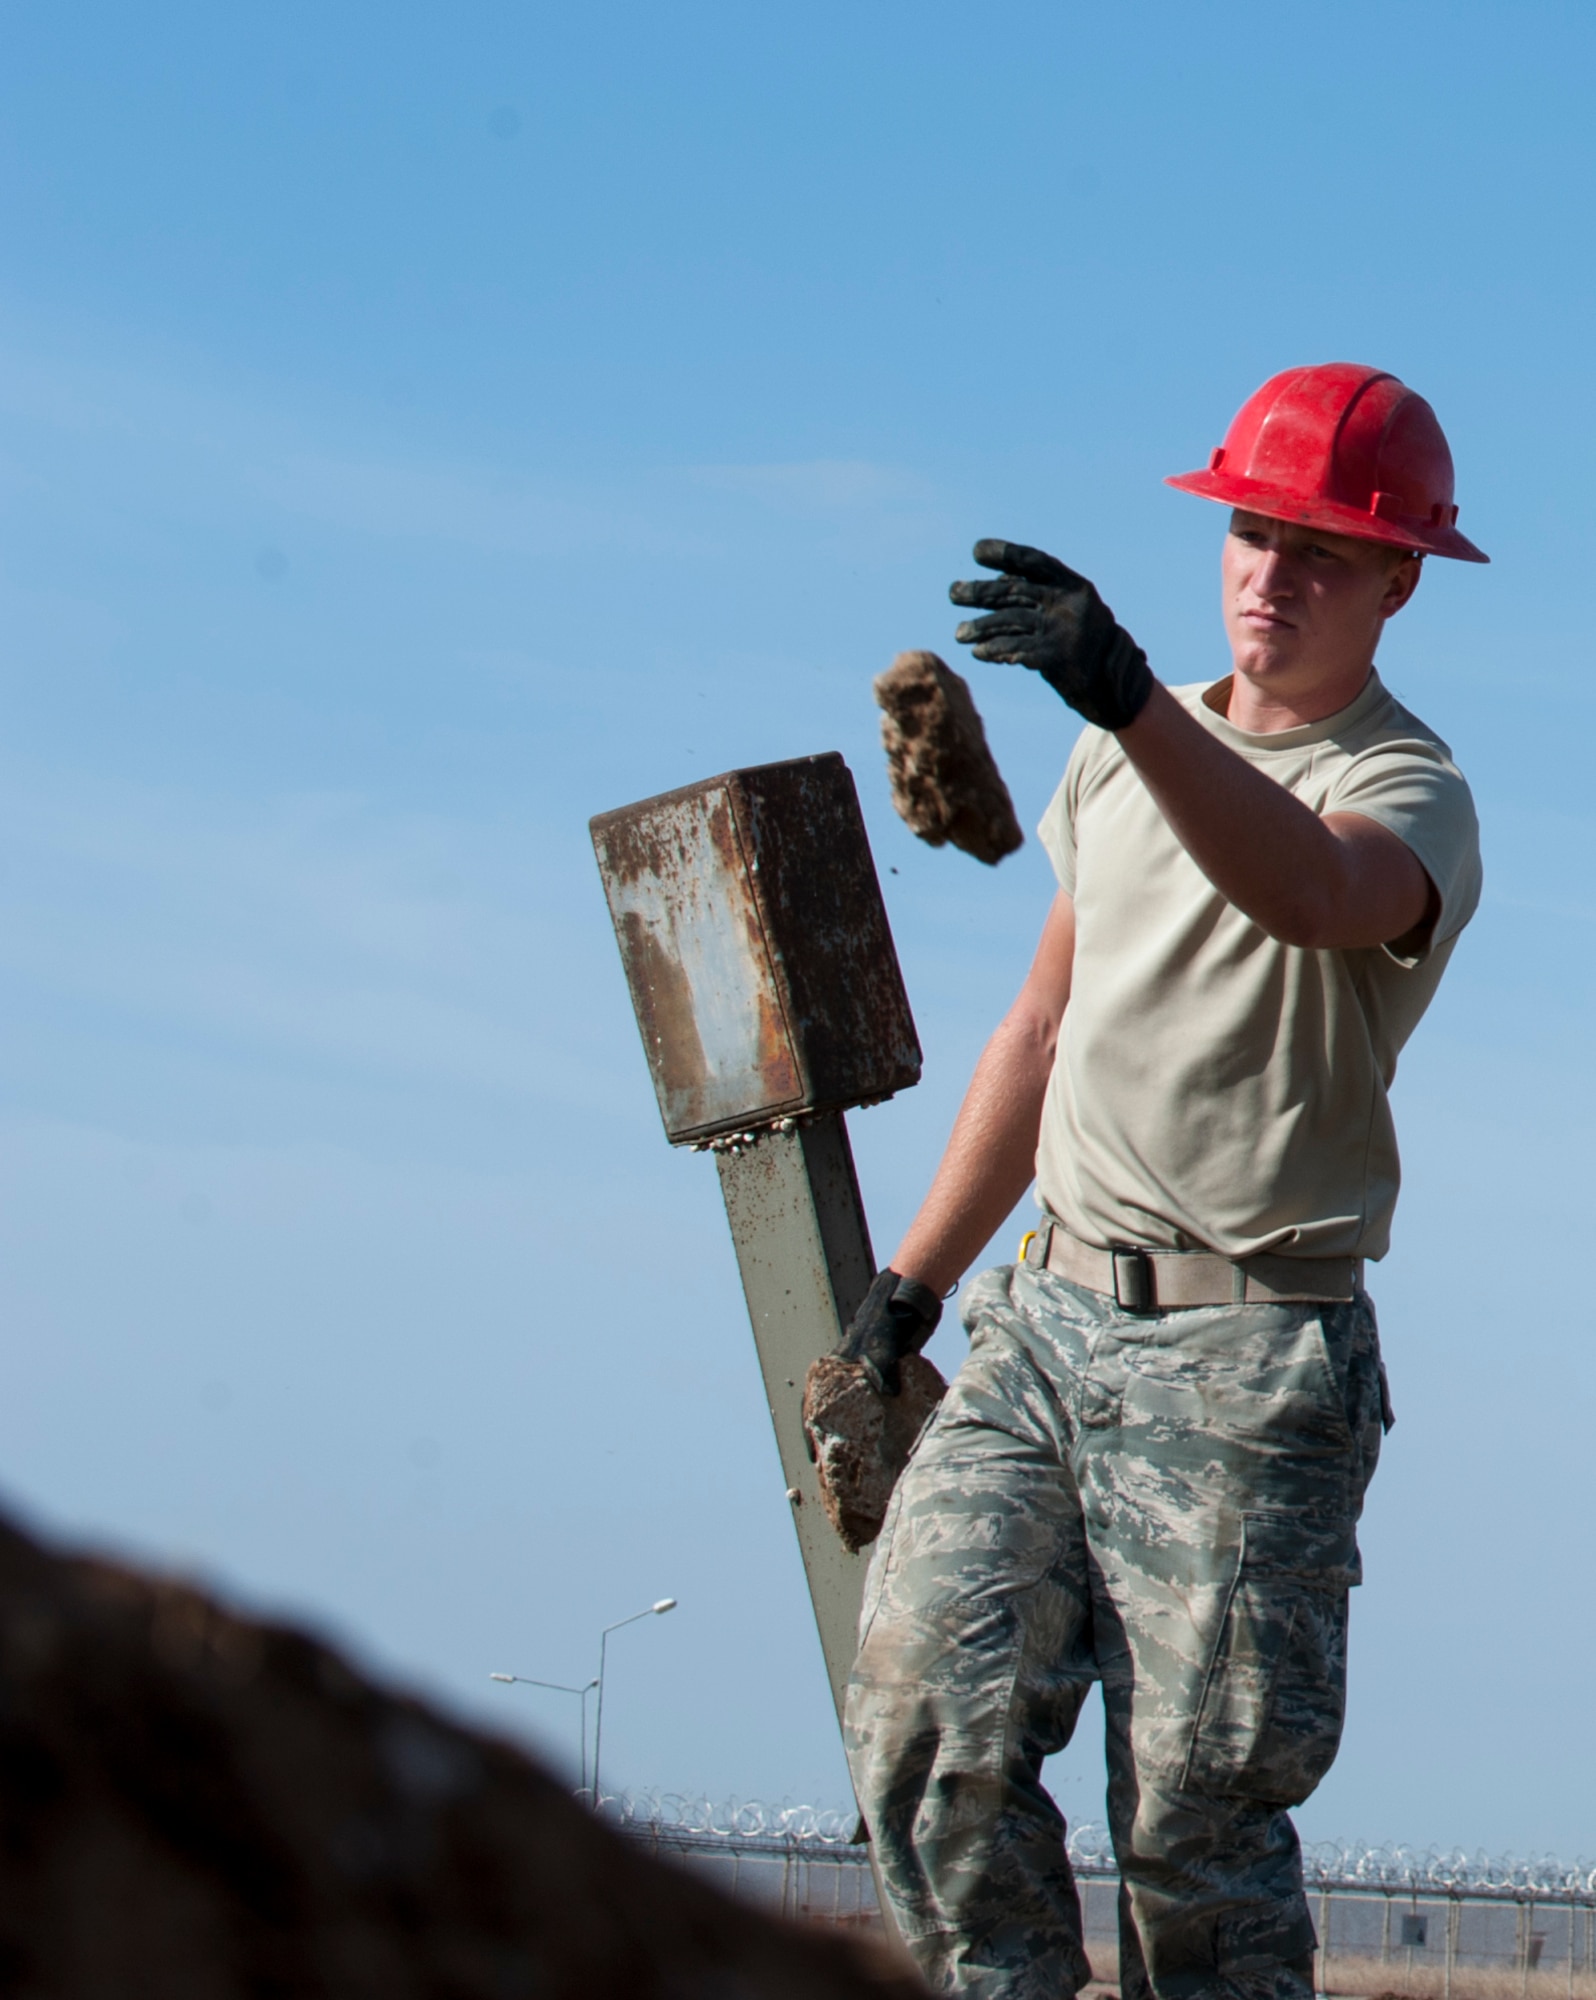 Airman 1st Class Zachary Keep, 39th Communications Squadron cable and antenna systems technician, removes rocks, unearthed during trenching, from the work site Nov. 18, 2015, at Incirlik Air Base, Turkey. The CS works to establish and maintain new and old infrastructure to ensure Incirlik, and Operation Inherent Resolve, missions are accomplished. (U.S. Air Force photo by Staff Sgt. Jack Sanders/Released) 